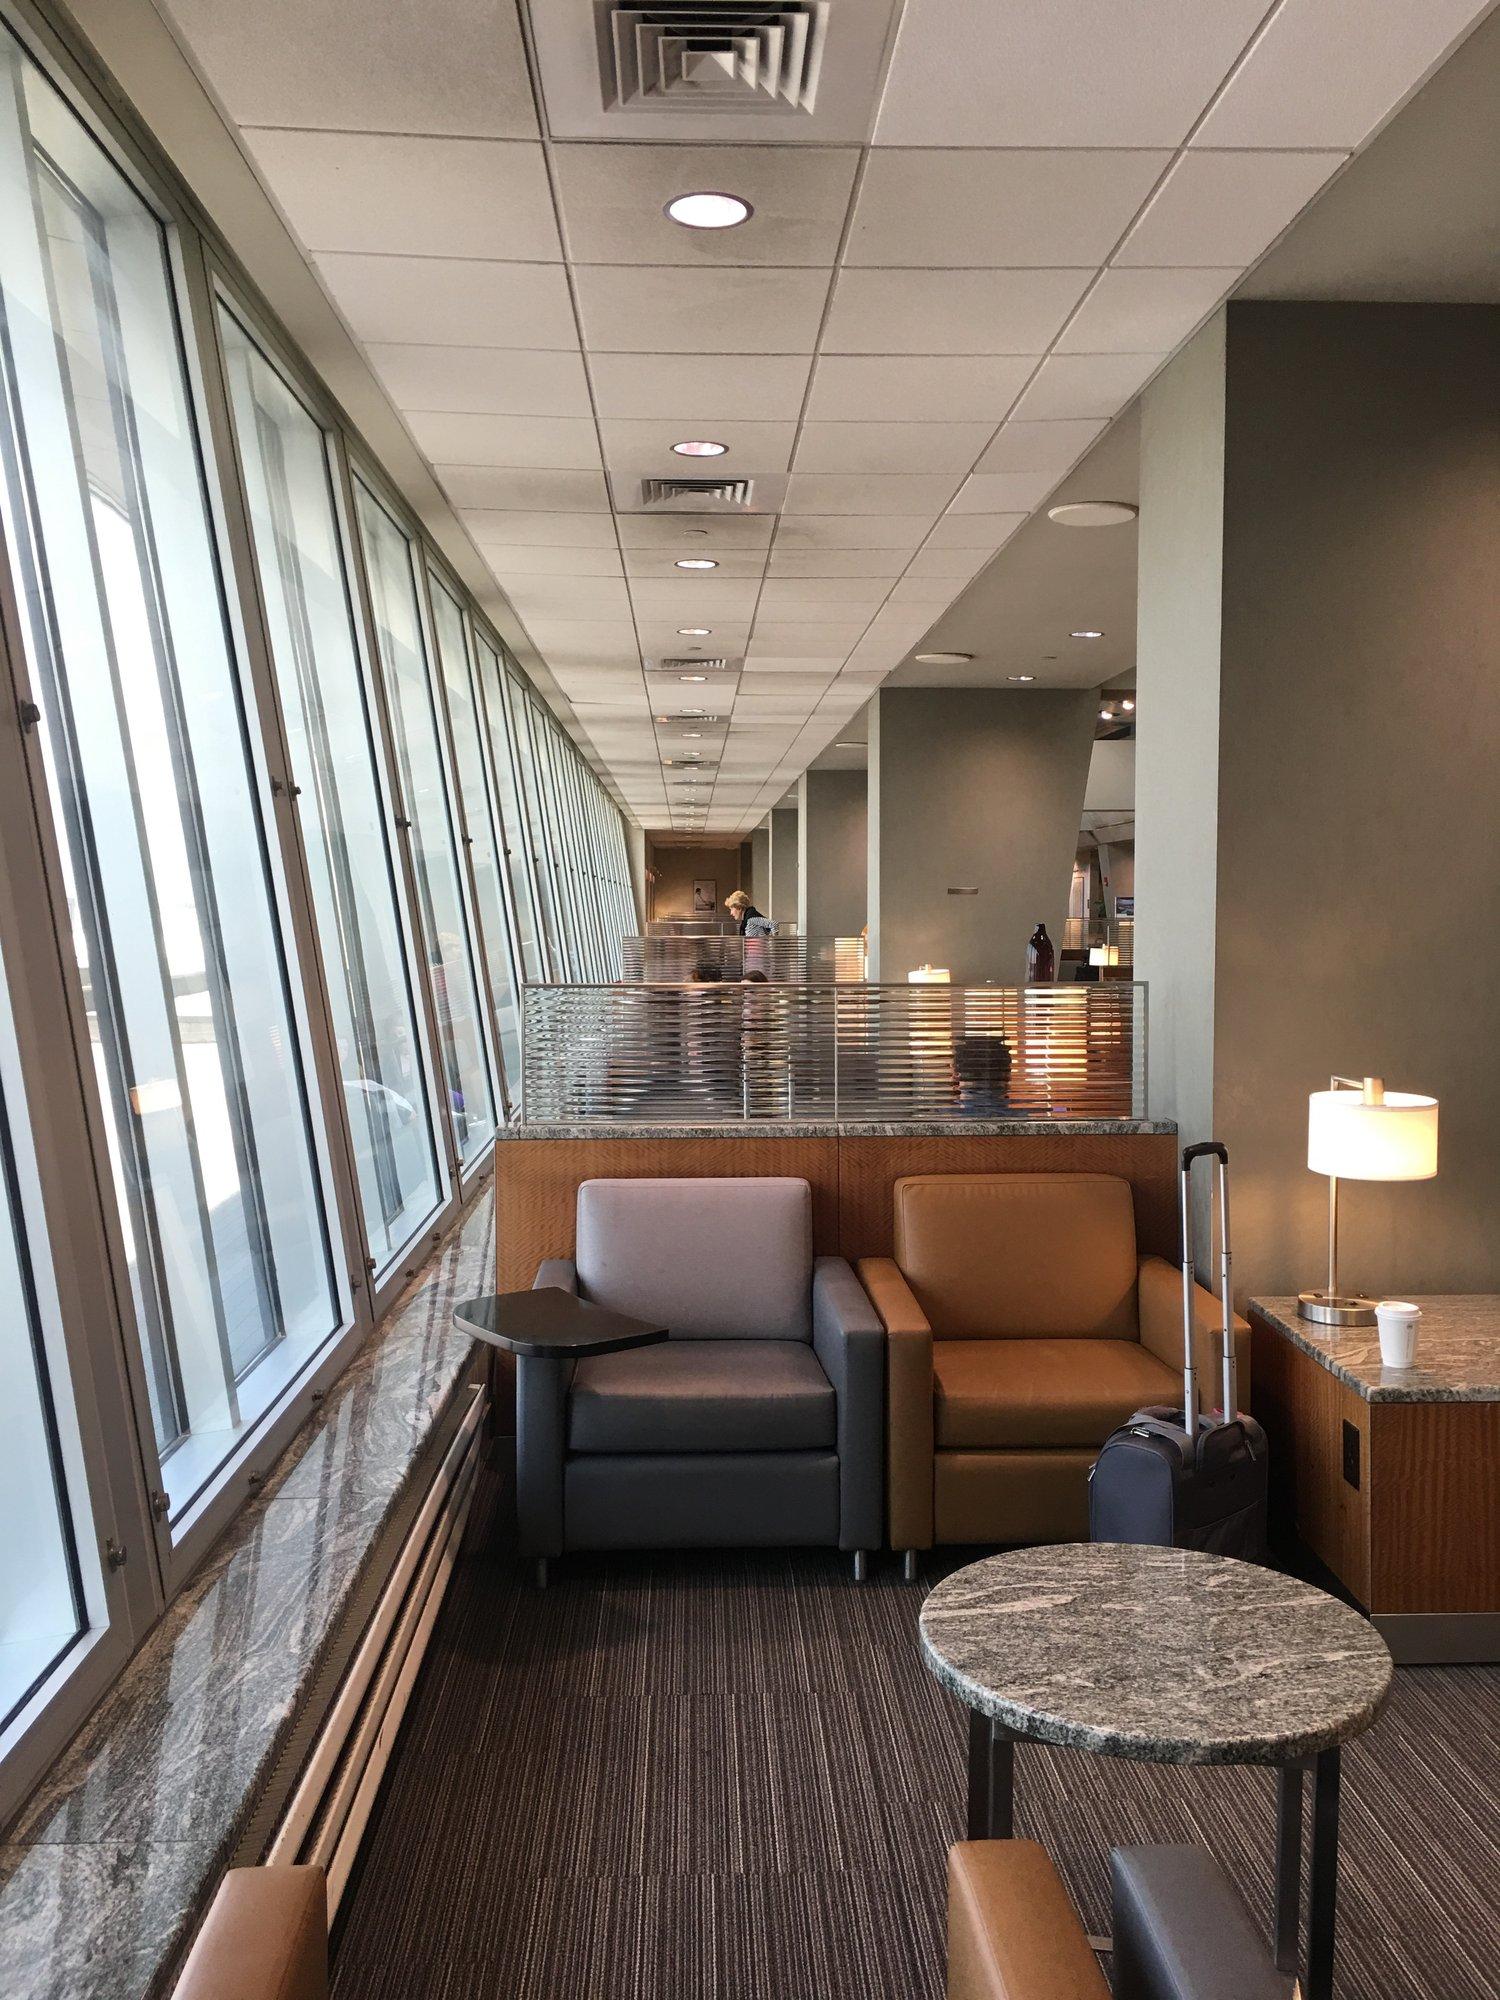 American Airlines Admirals Club image 26 of 48